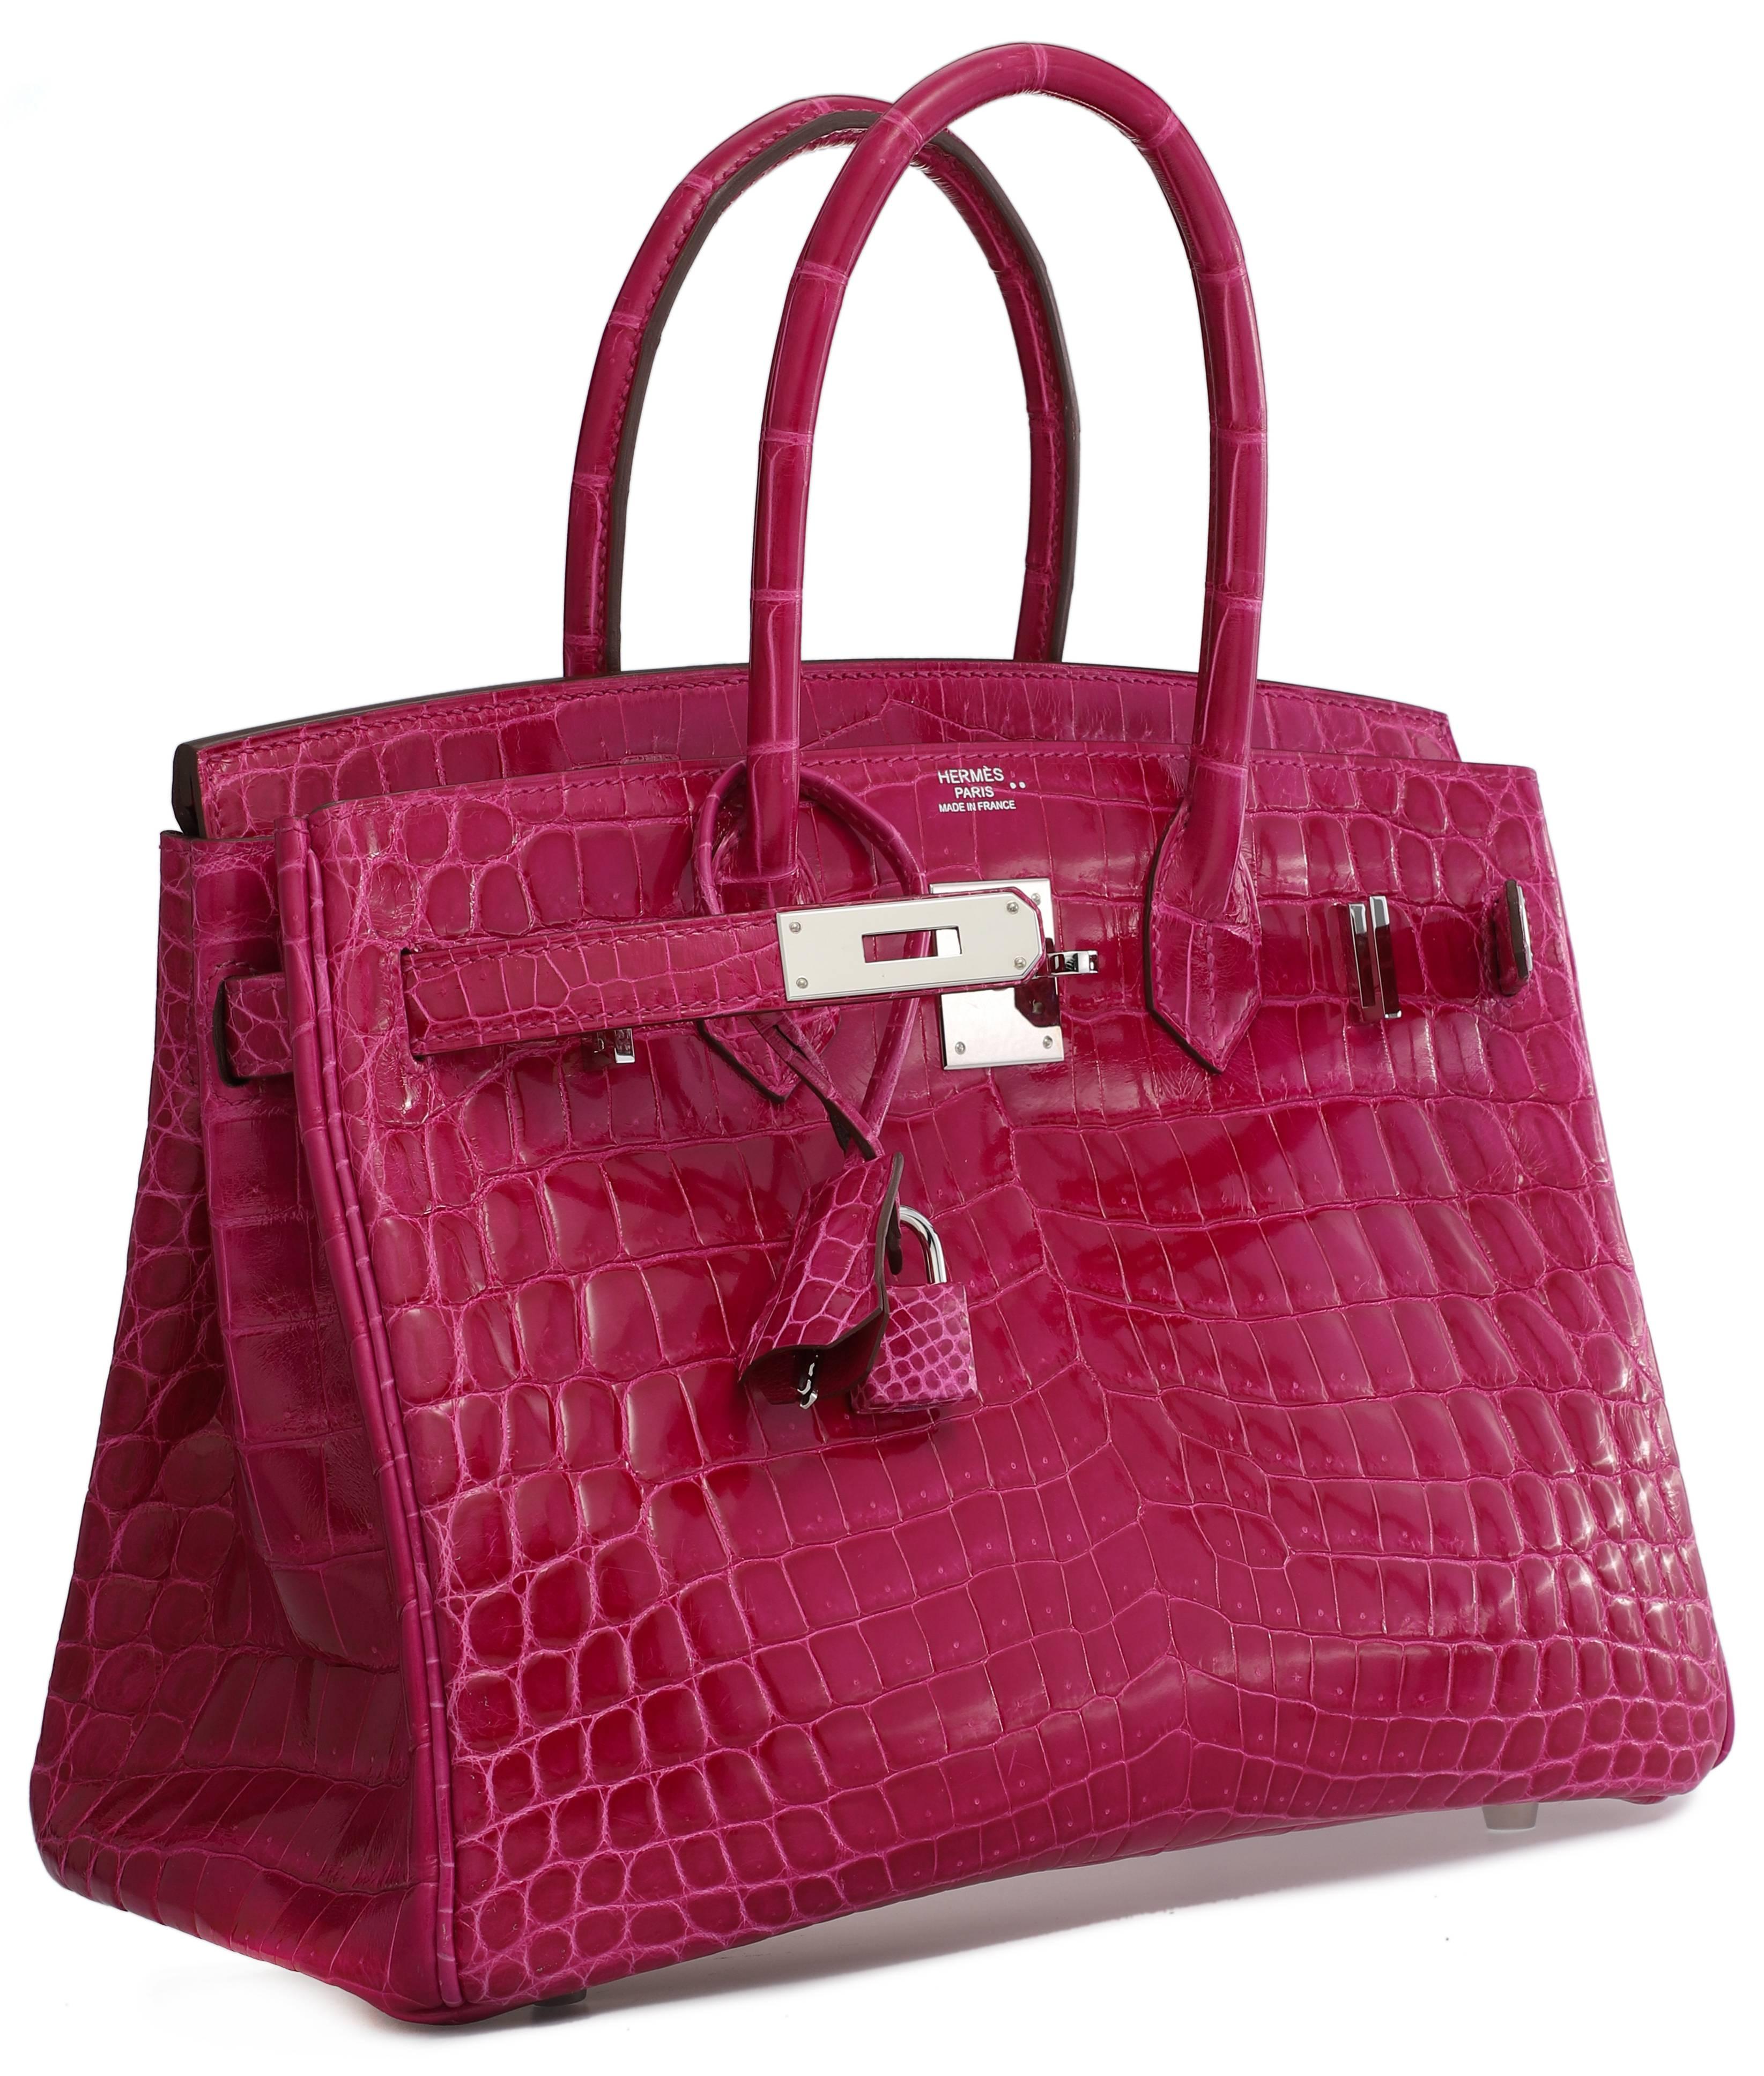 HERMES Birkin 30 vibrant rose scheherazade Niloticus crocodile with palladium hardware. Appears to have never been used. Hardware intact although protective plastics are missing. Extremely tiny wear on feet. A tiny wear mark on 1 corner. Stamp Q in